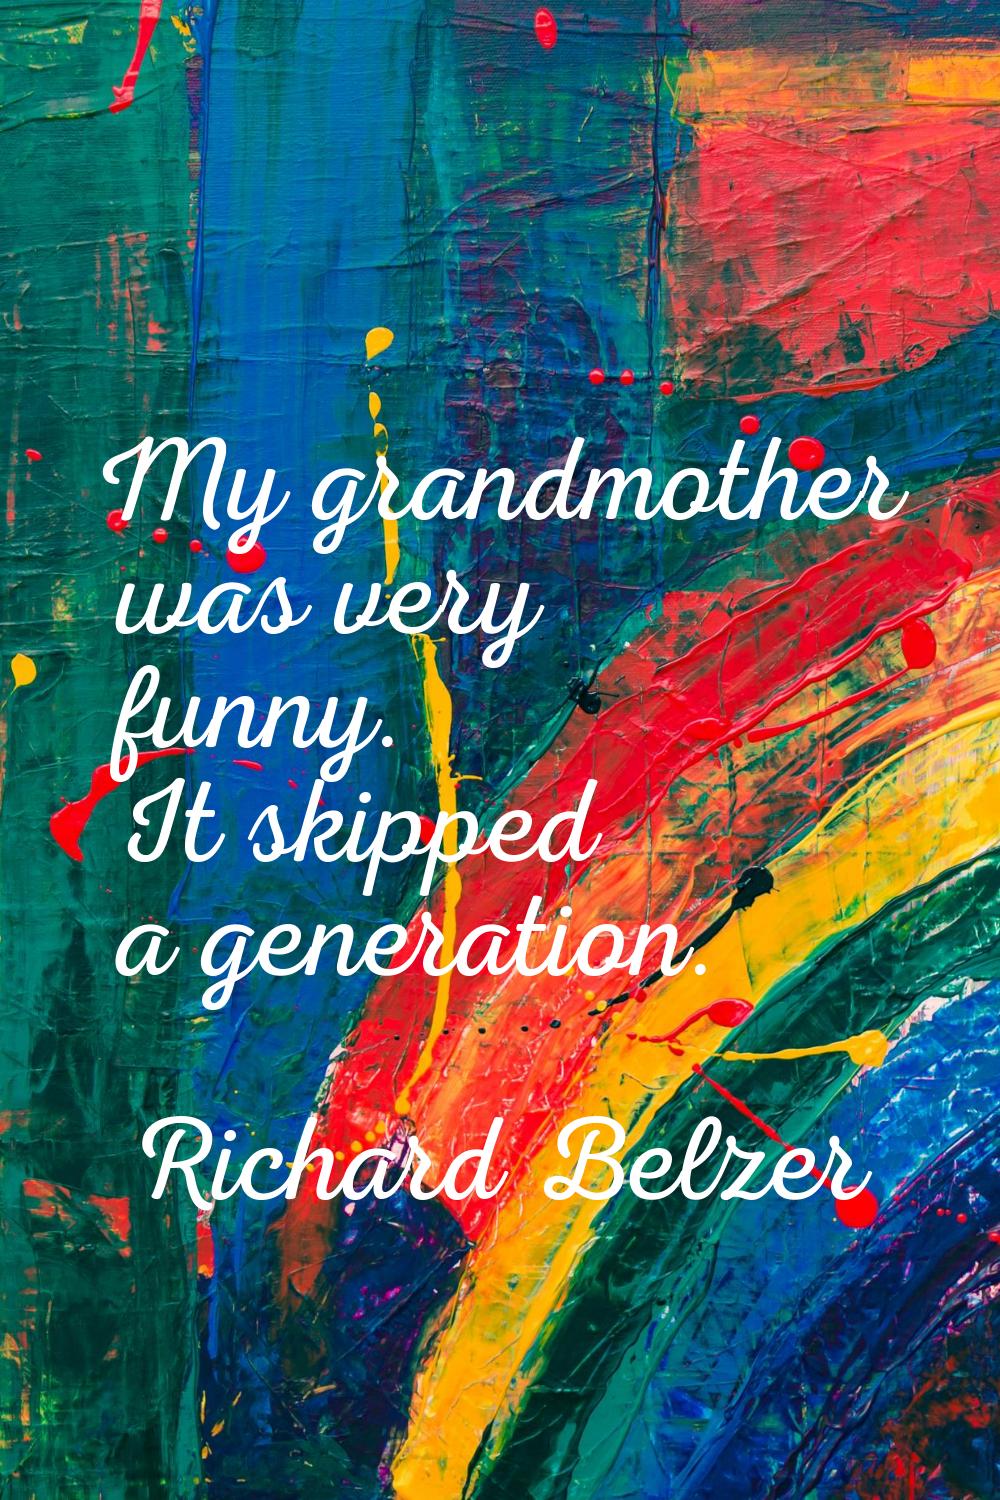 My grandmother was very funny. It skipped a generation.